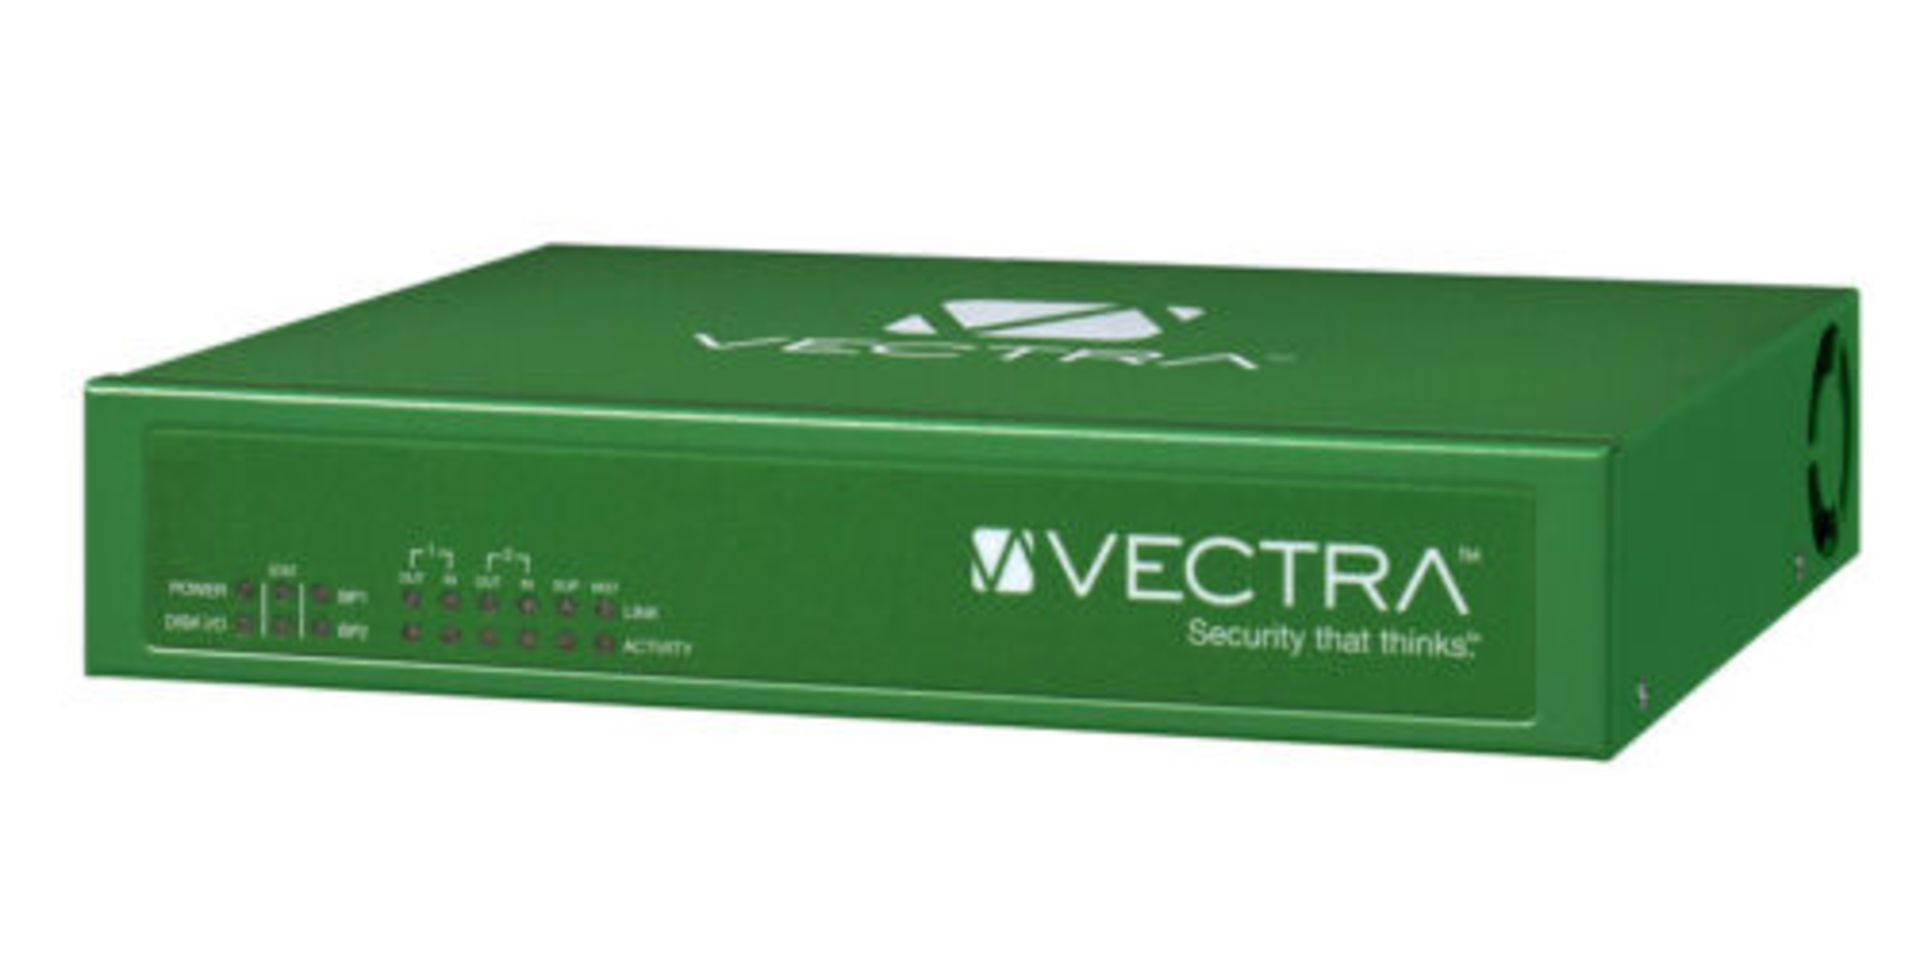 Vectra S-Series Cognito Sensor Comprehensive threat analysis & real-time Review $8000 VALUE